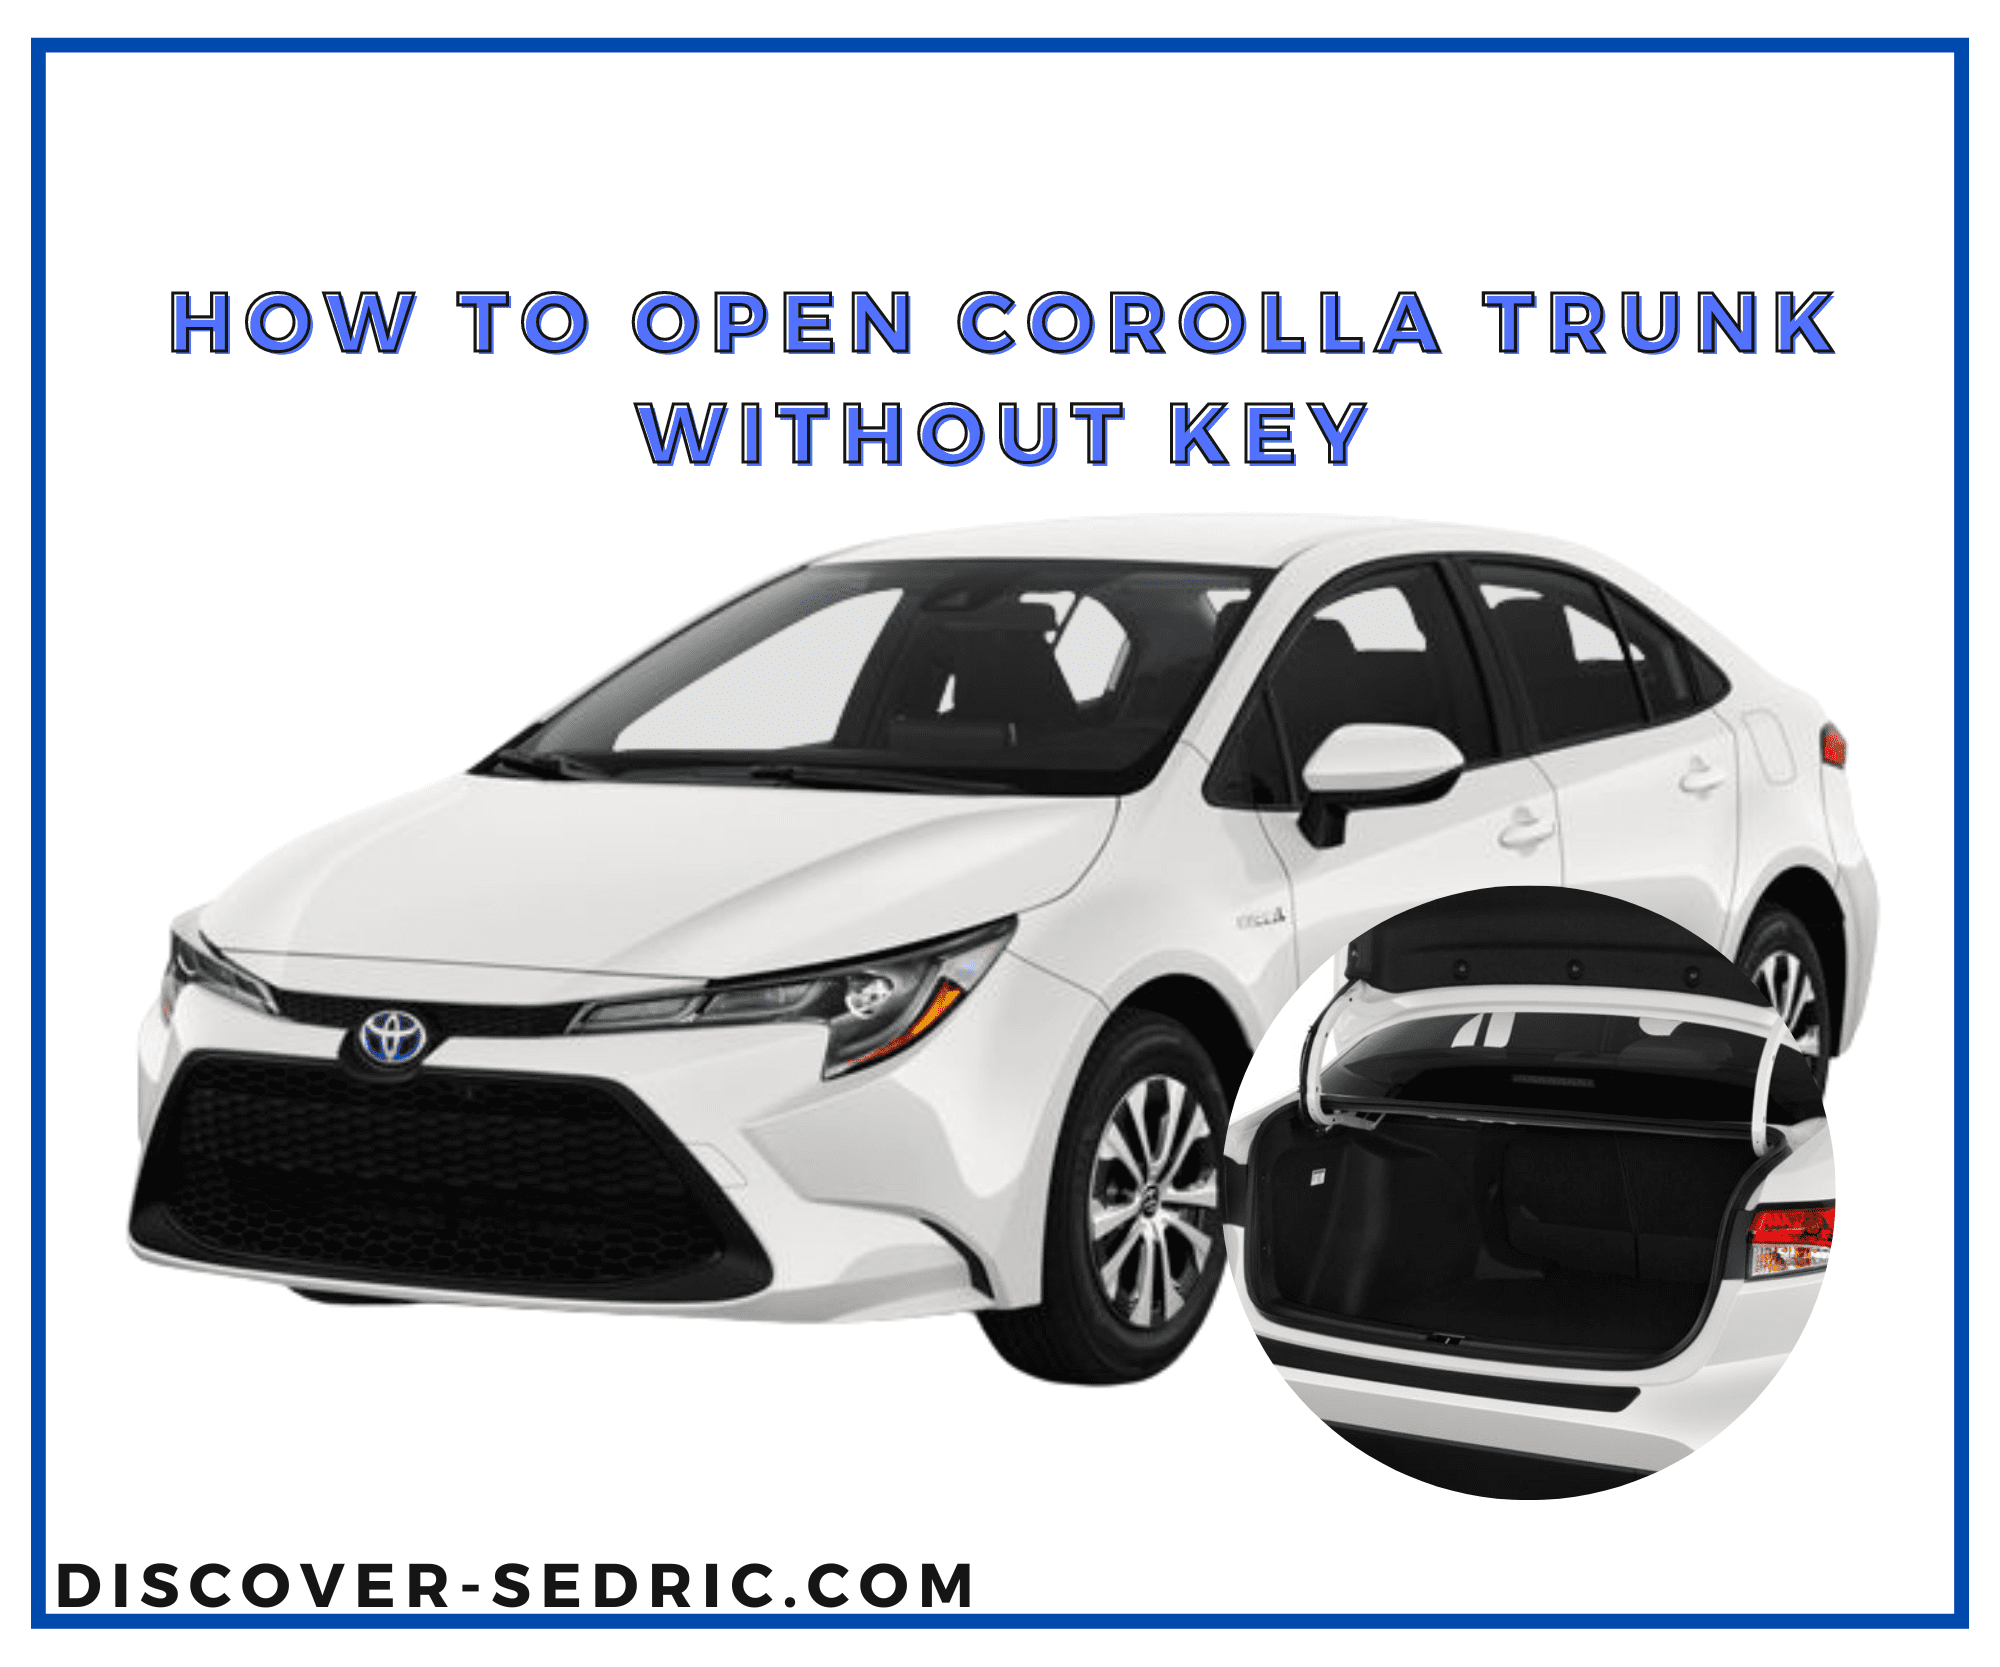 COROLLA Trunk Without Key